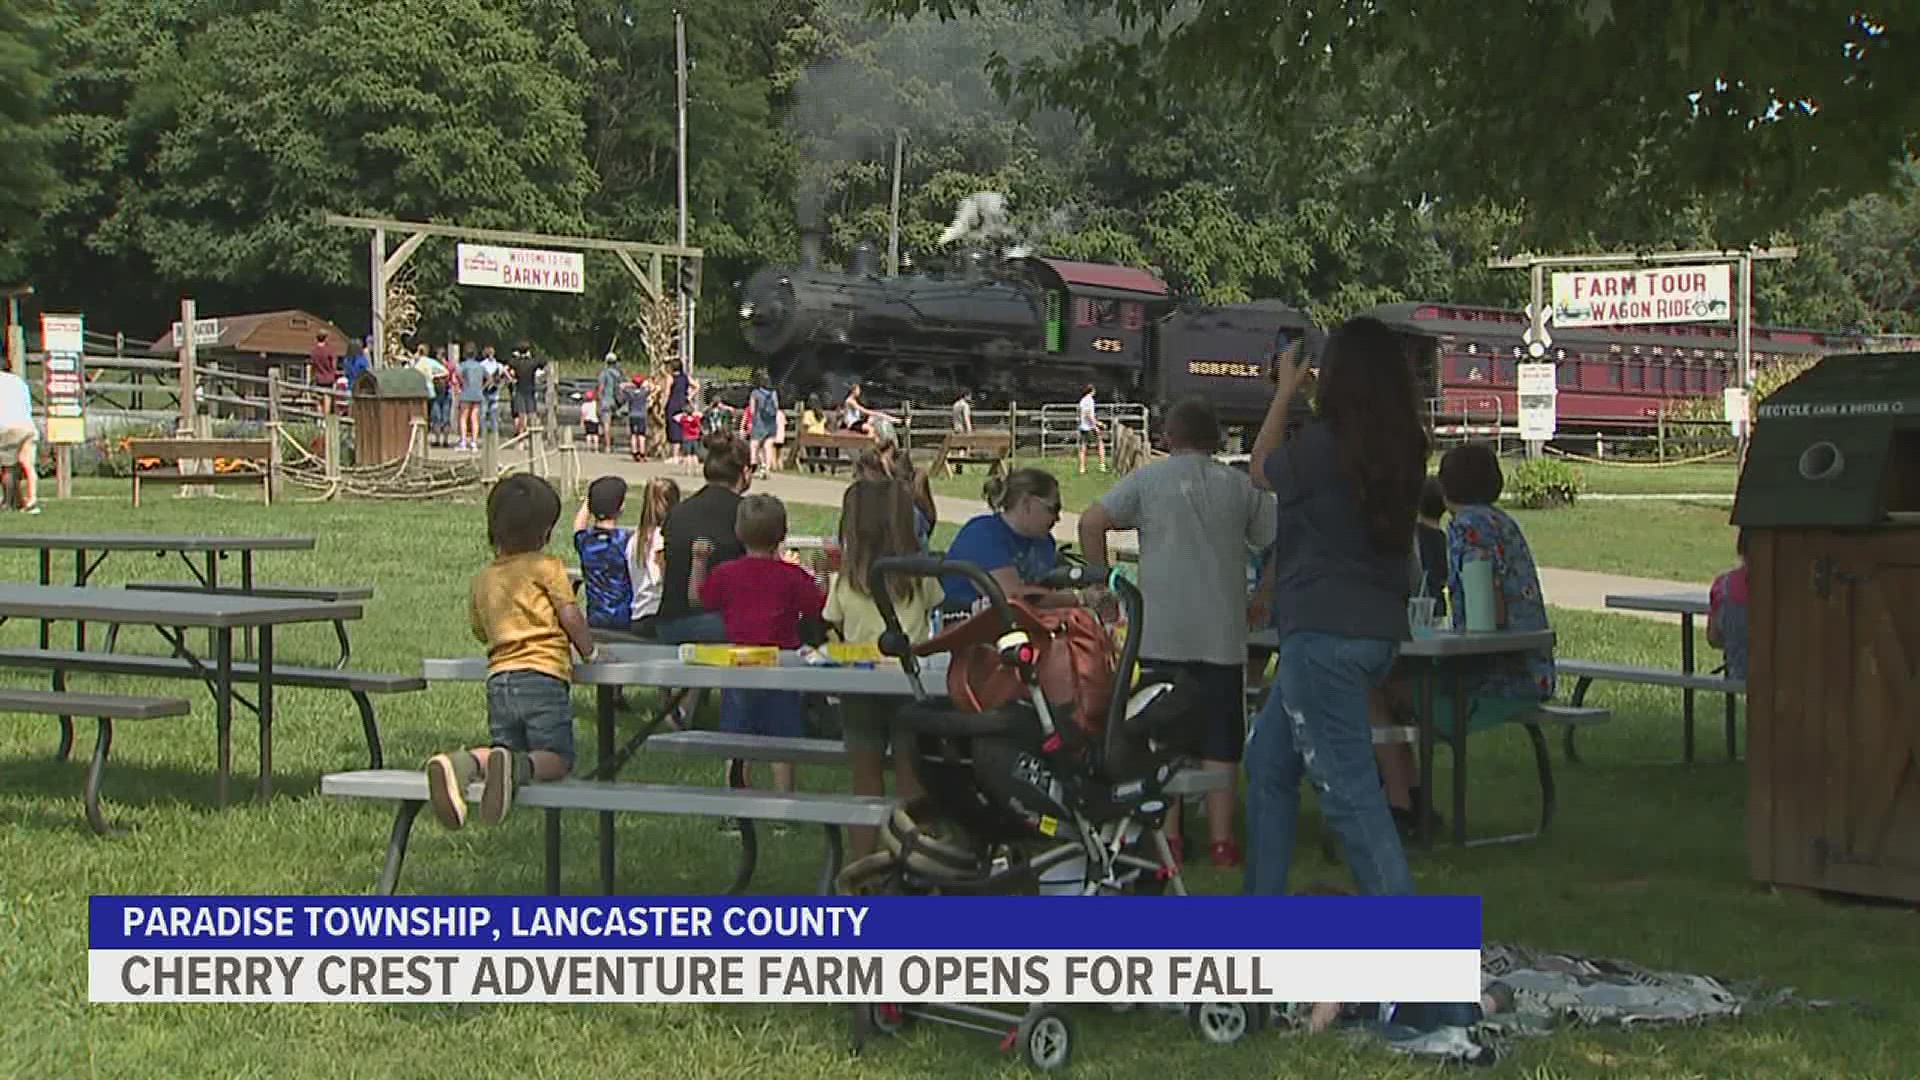 There are more than 60 farm-fun activities and rides, including trains, go-karts, flashlight mazes and live music at Cherry Crest Adventure Farm.